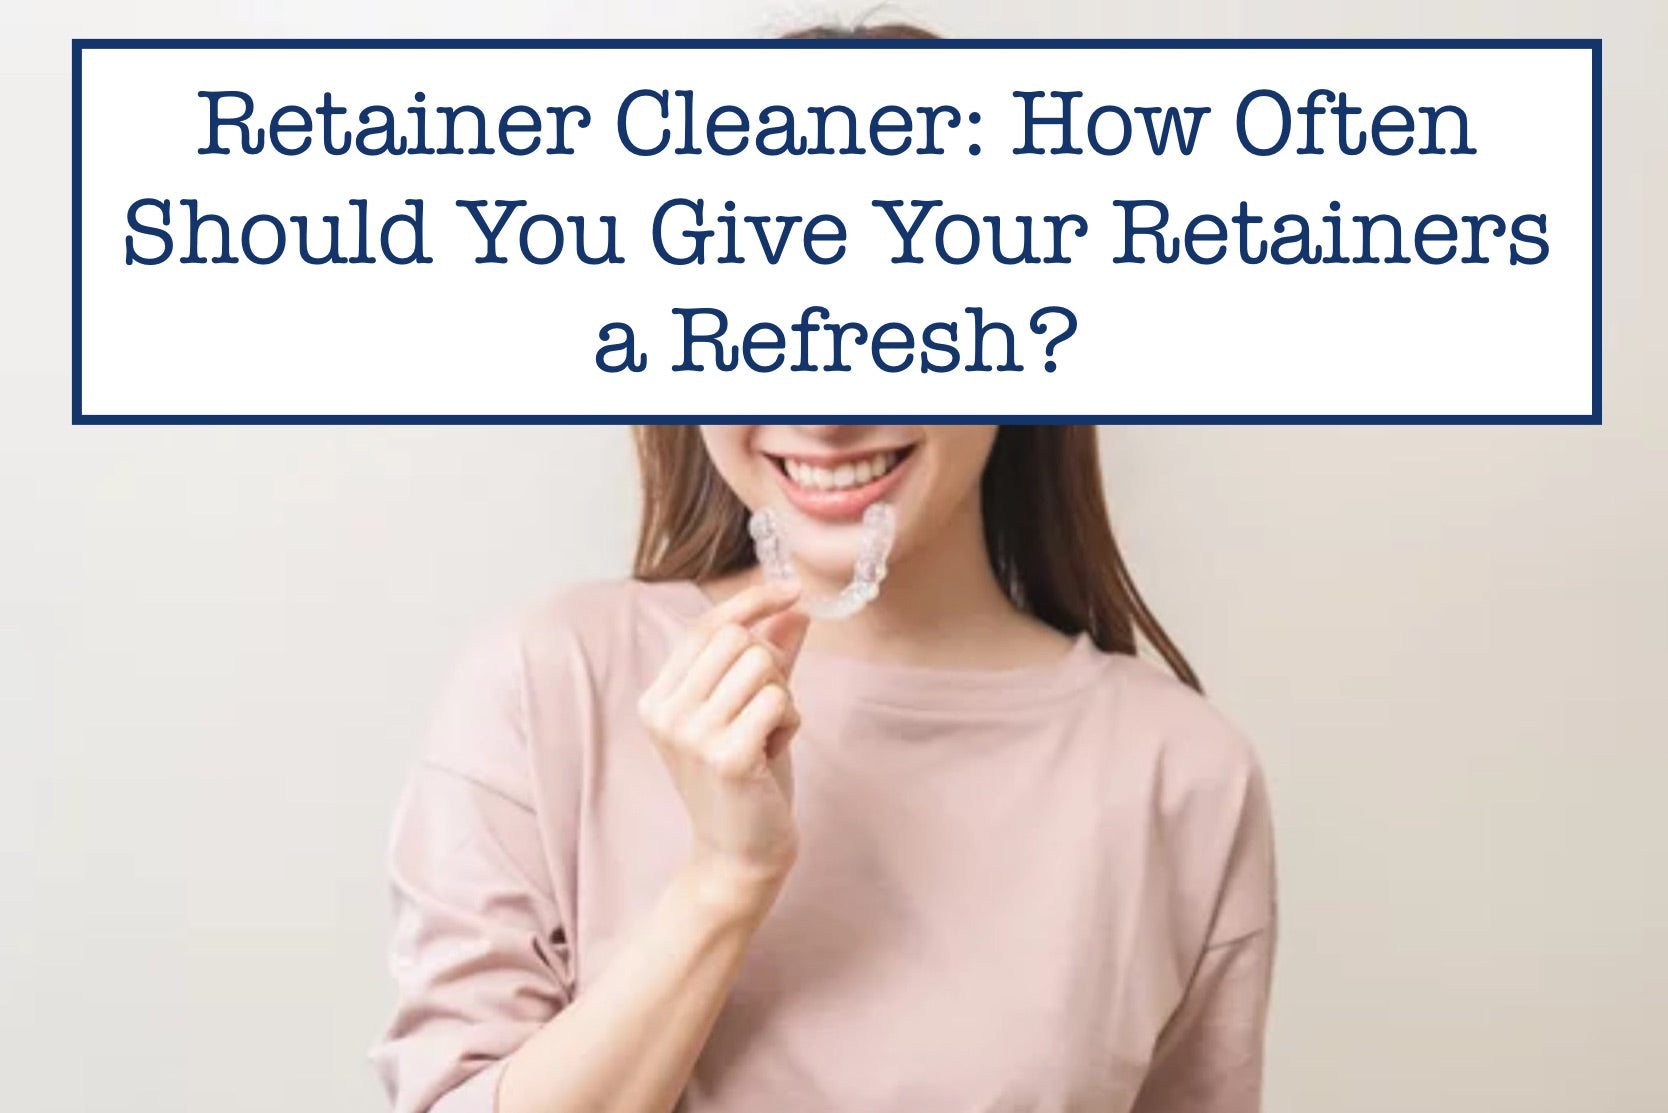 Retainer Cleaner: How Often Should You Give Your Retainers a Refresh?